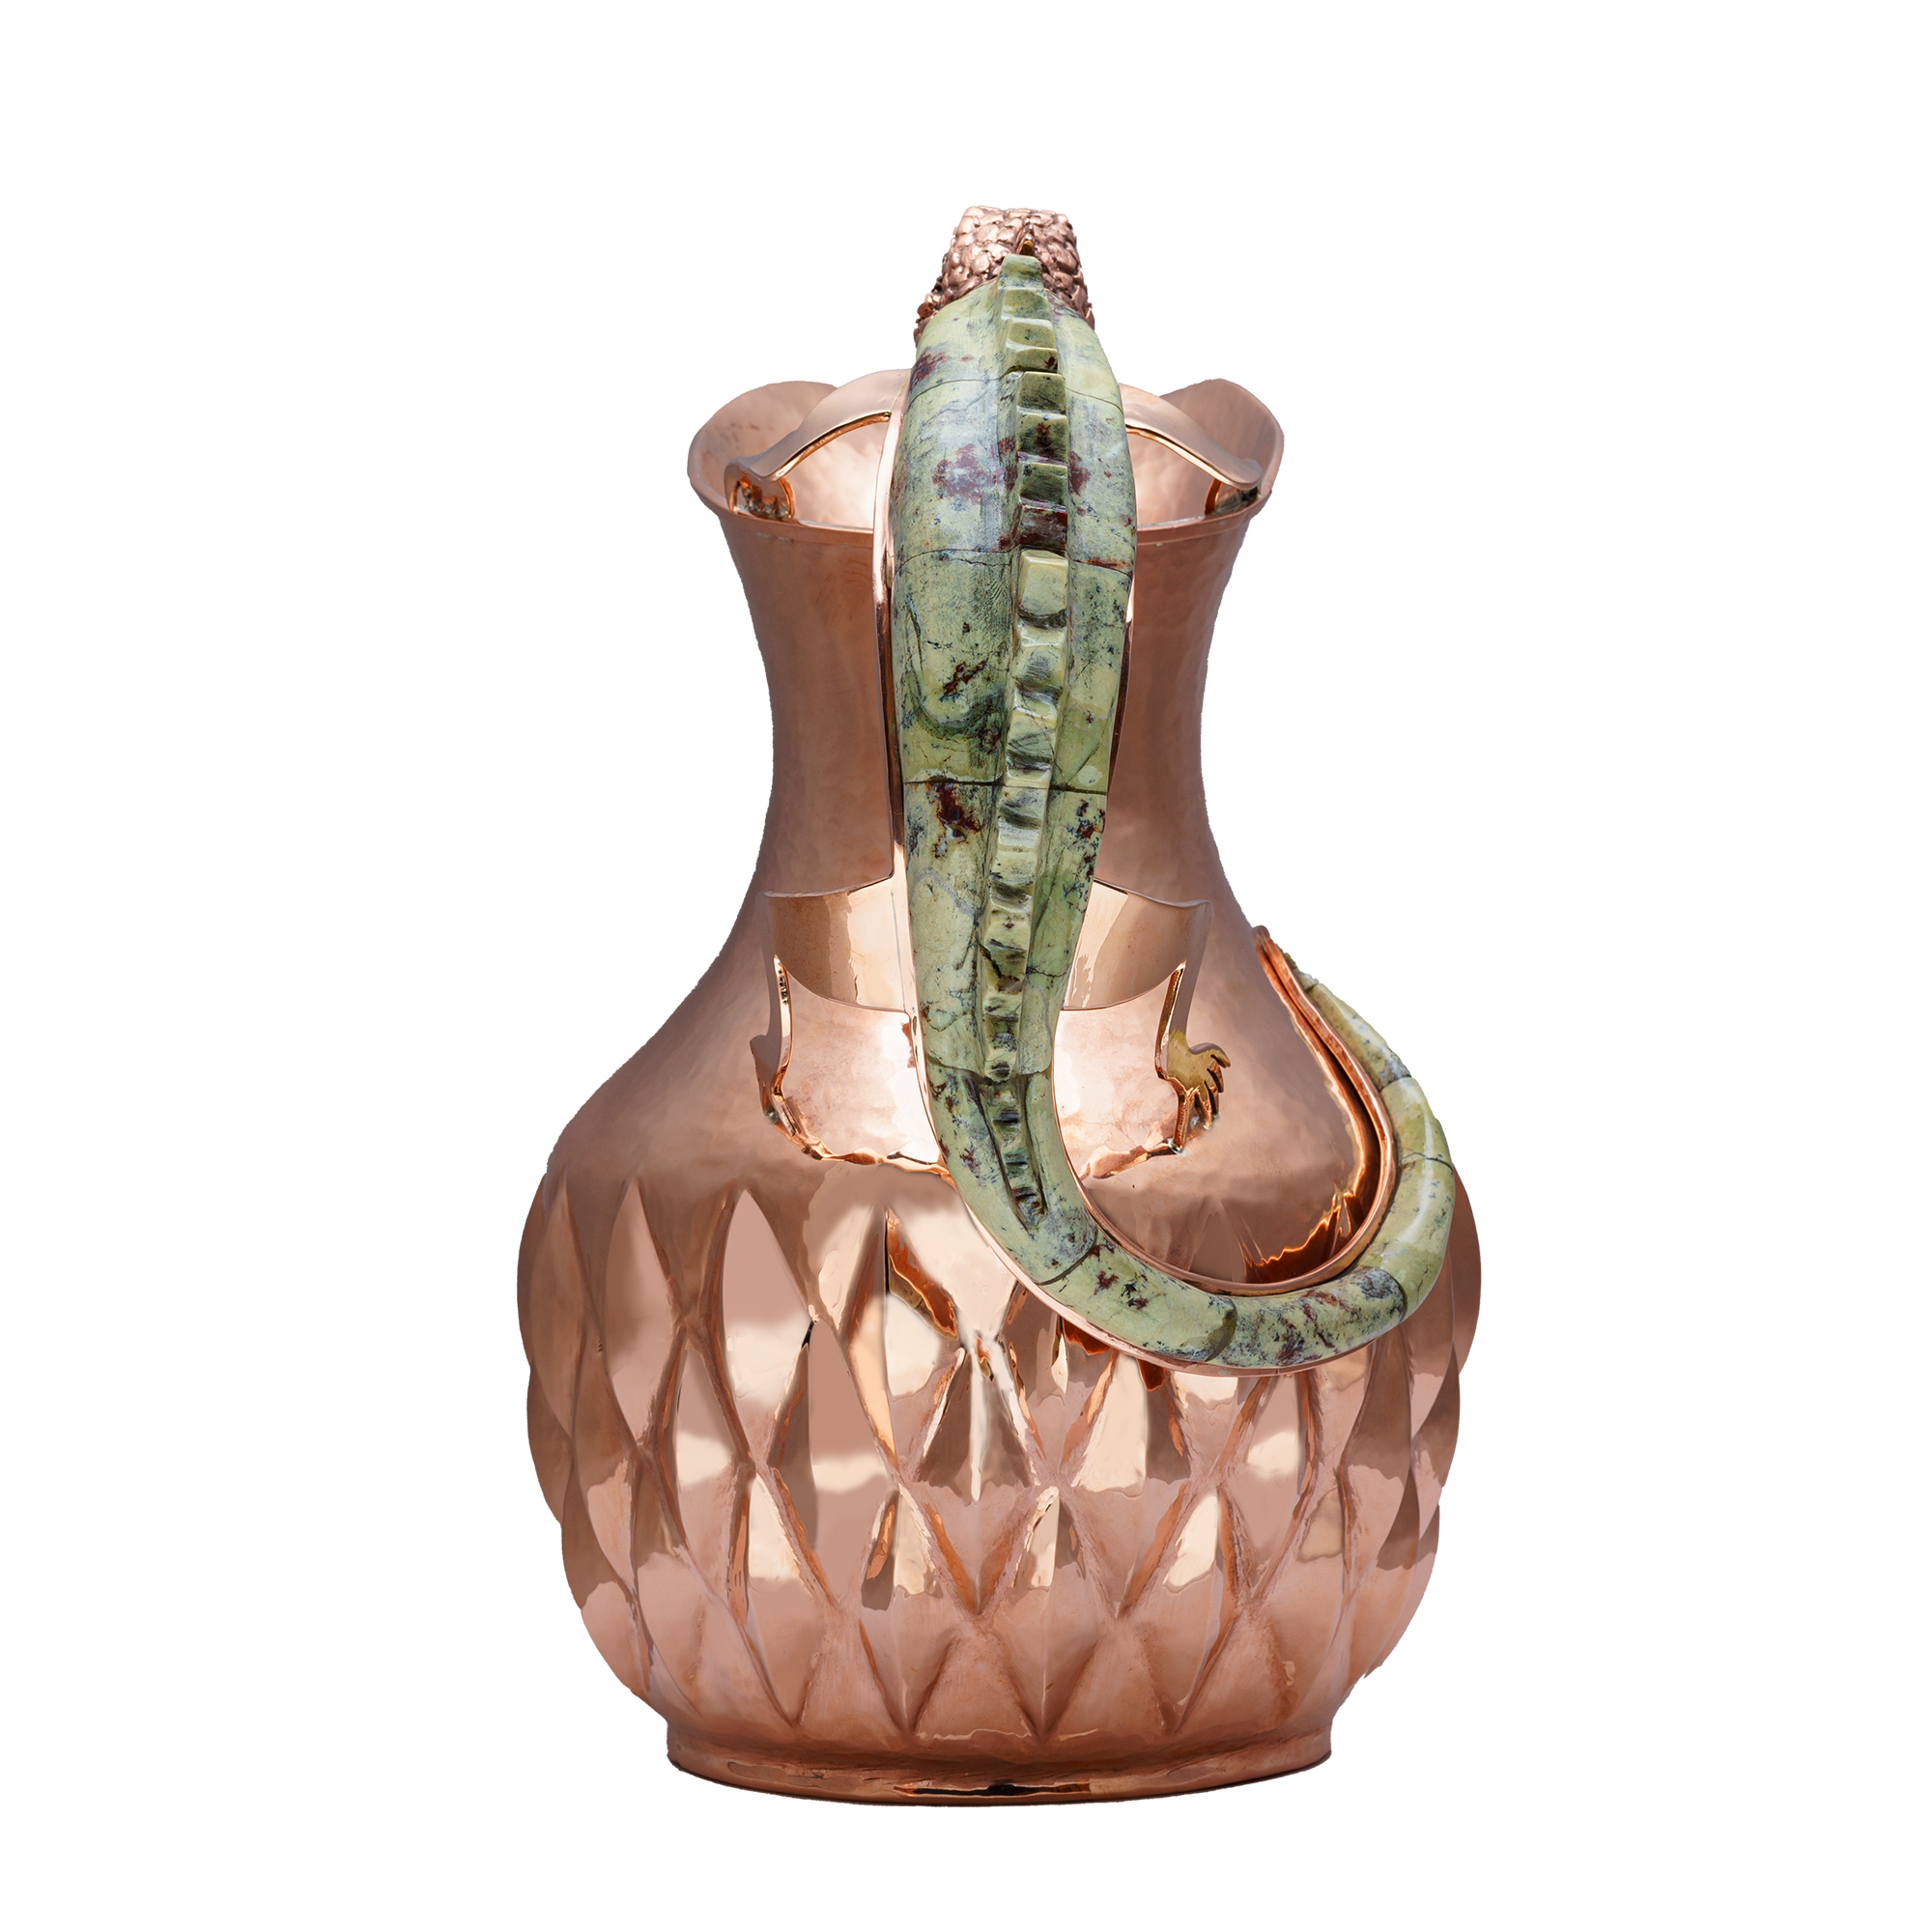 SU.ANG.4032 - LG. Copper Pitcher w/ Stone Iguana Handle, Wide Mouth